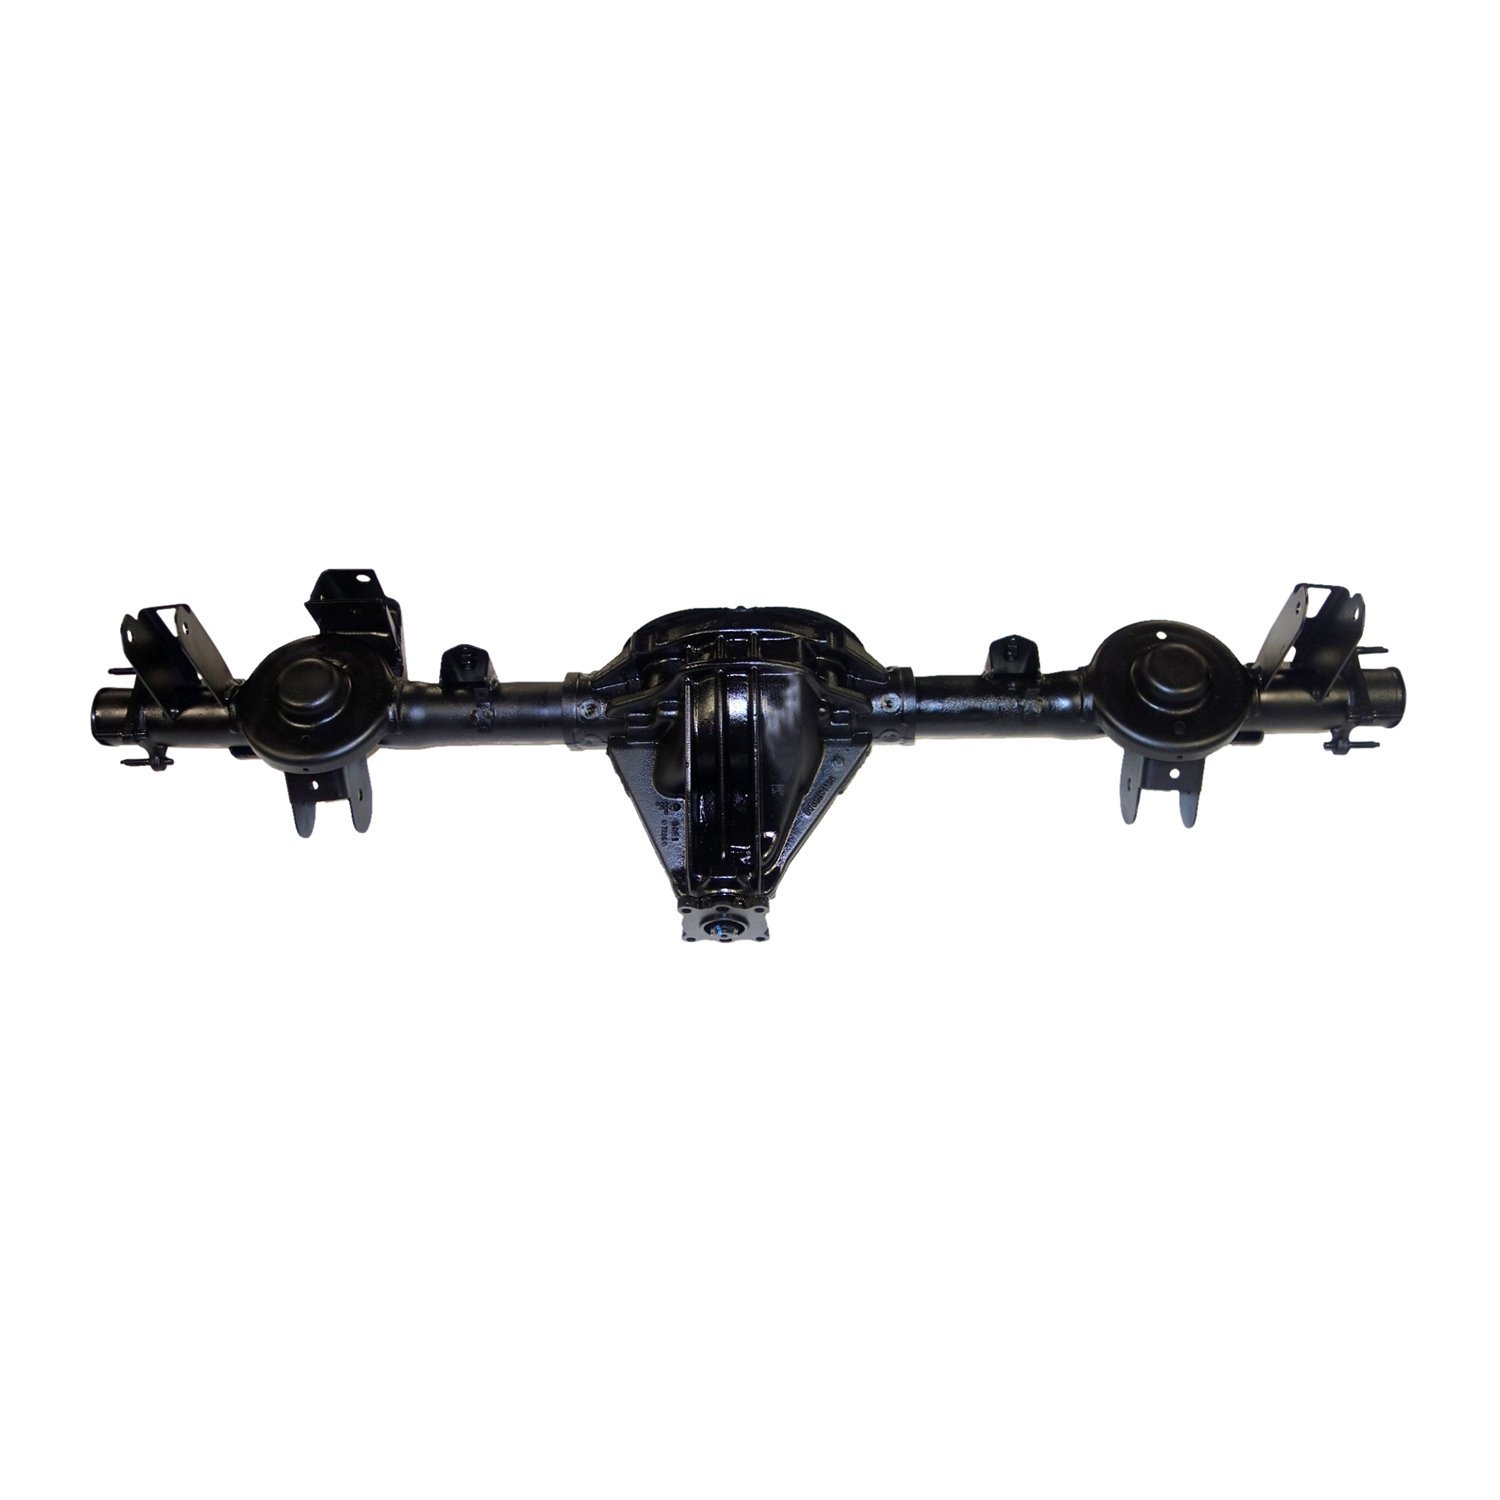 Remanufactured Axle Assembly for Chy 8.25" 07-12 Nitro & Liberty 3.21 Ratio, Open